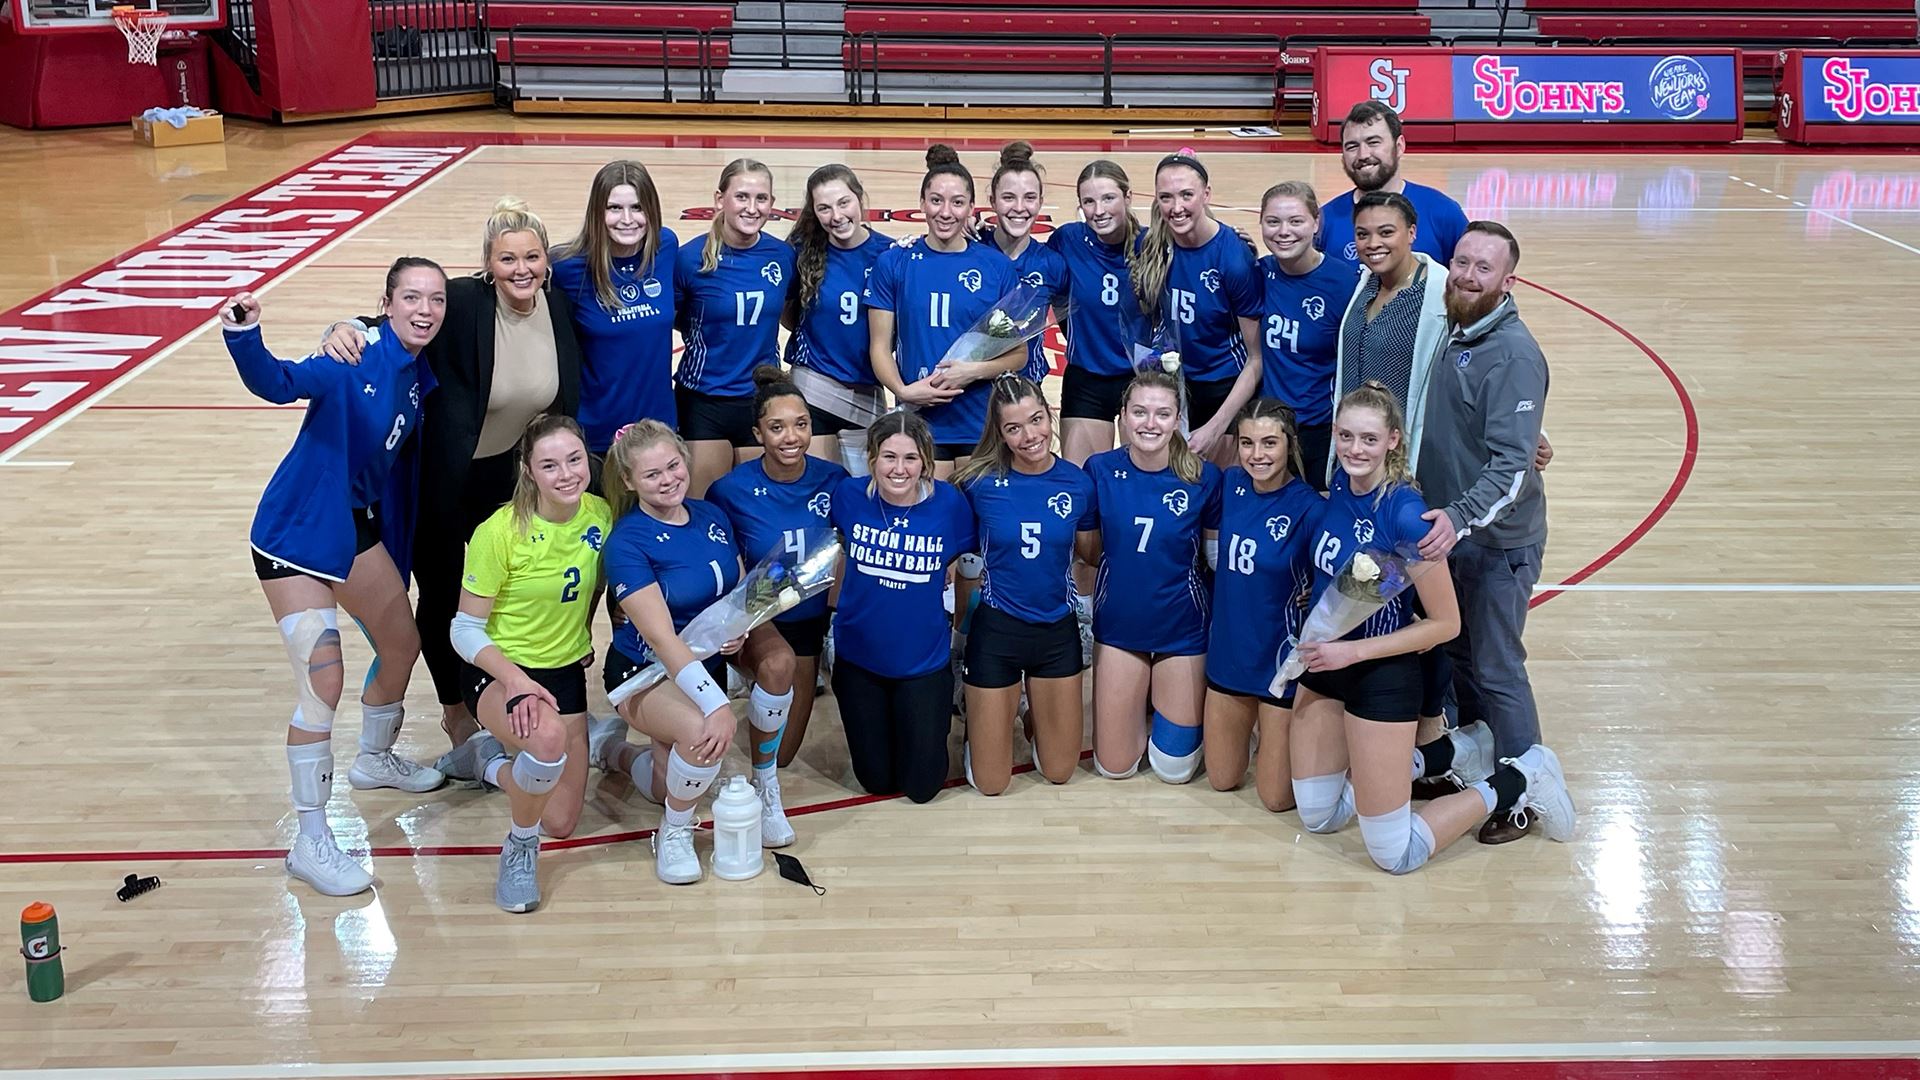 The Seton Hall women's volleyball team poses for a photo after a match.